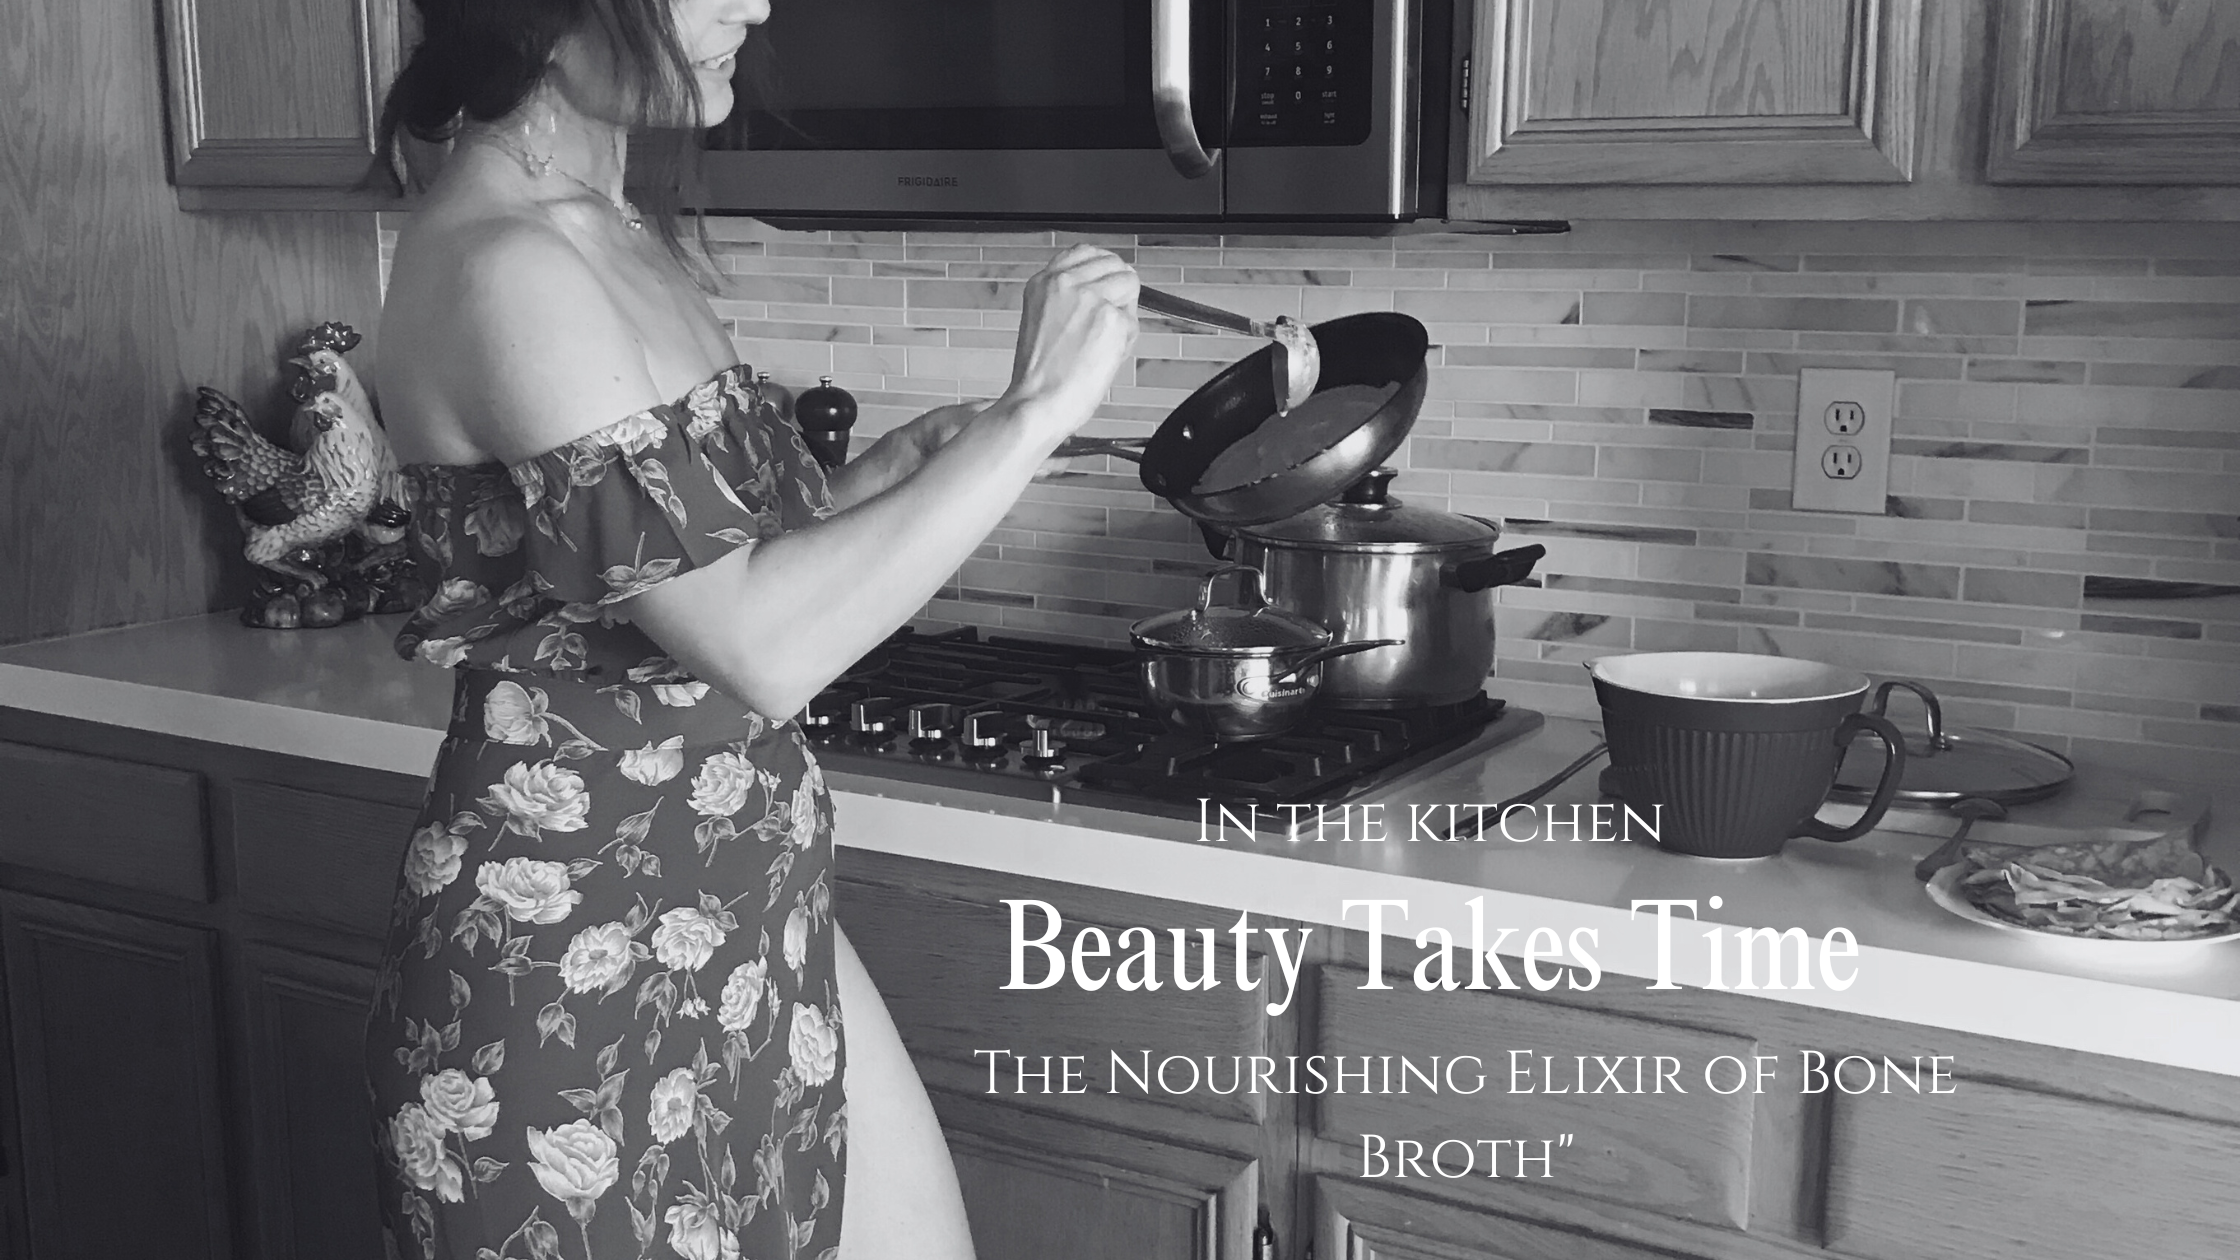 Beauty Takes Time - In the Kitchen : The Nourishing Elixir of Bone Broth